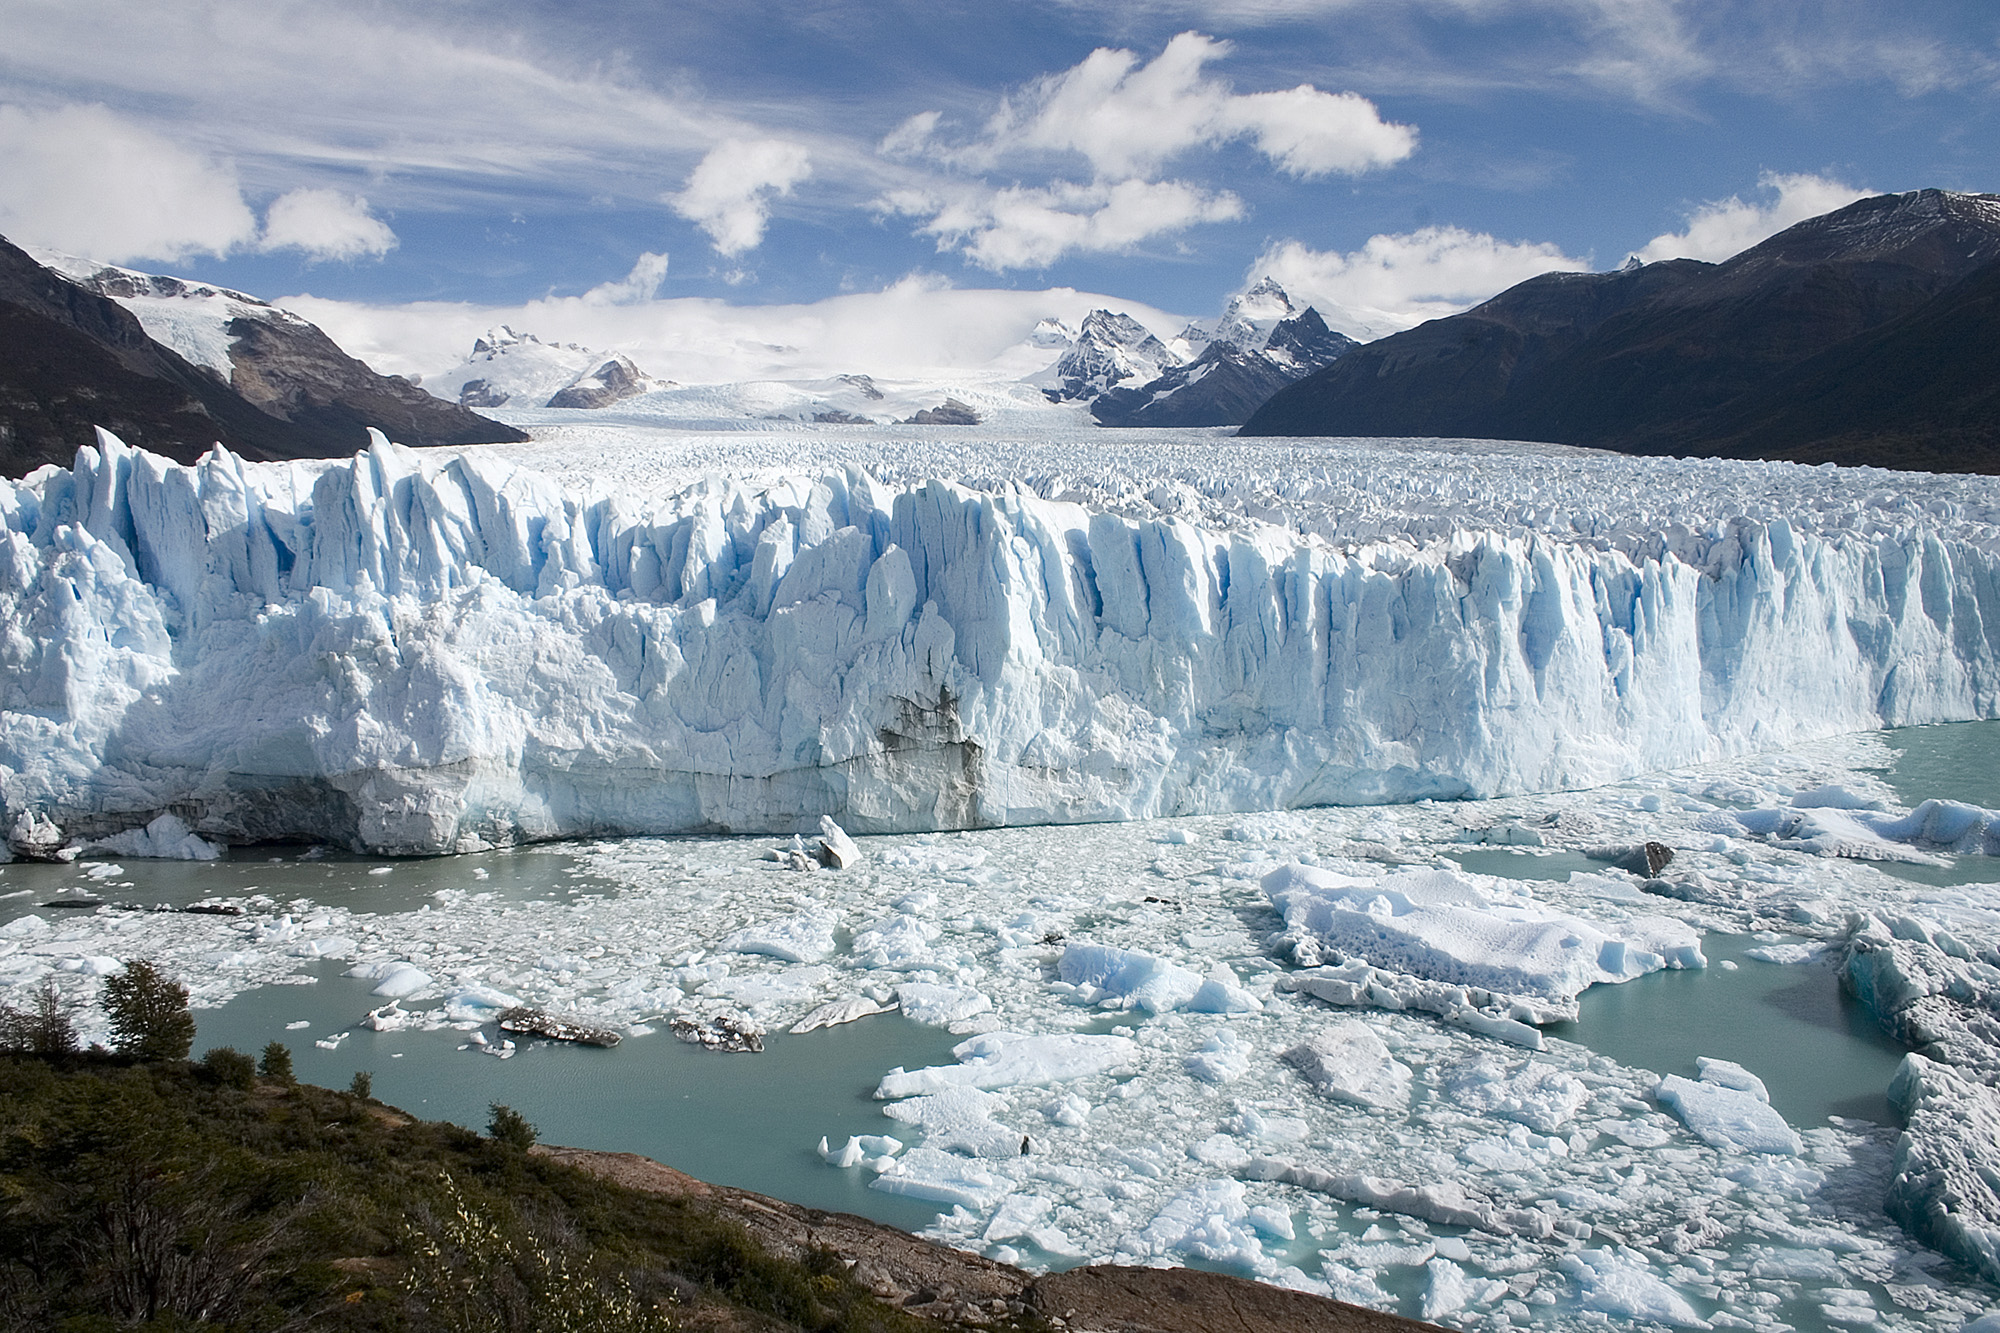 UNESCO warns about the disappearance of iconic World Heritage glaciers by 2050